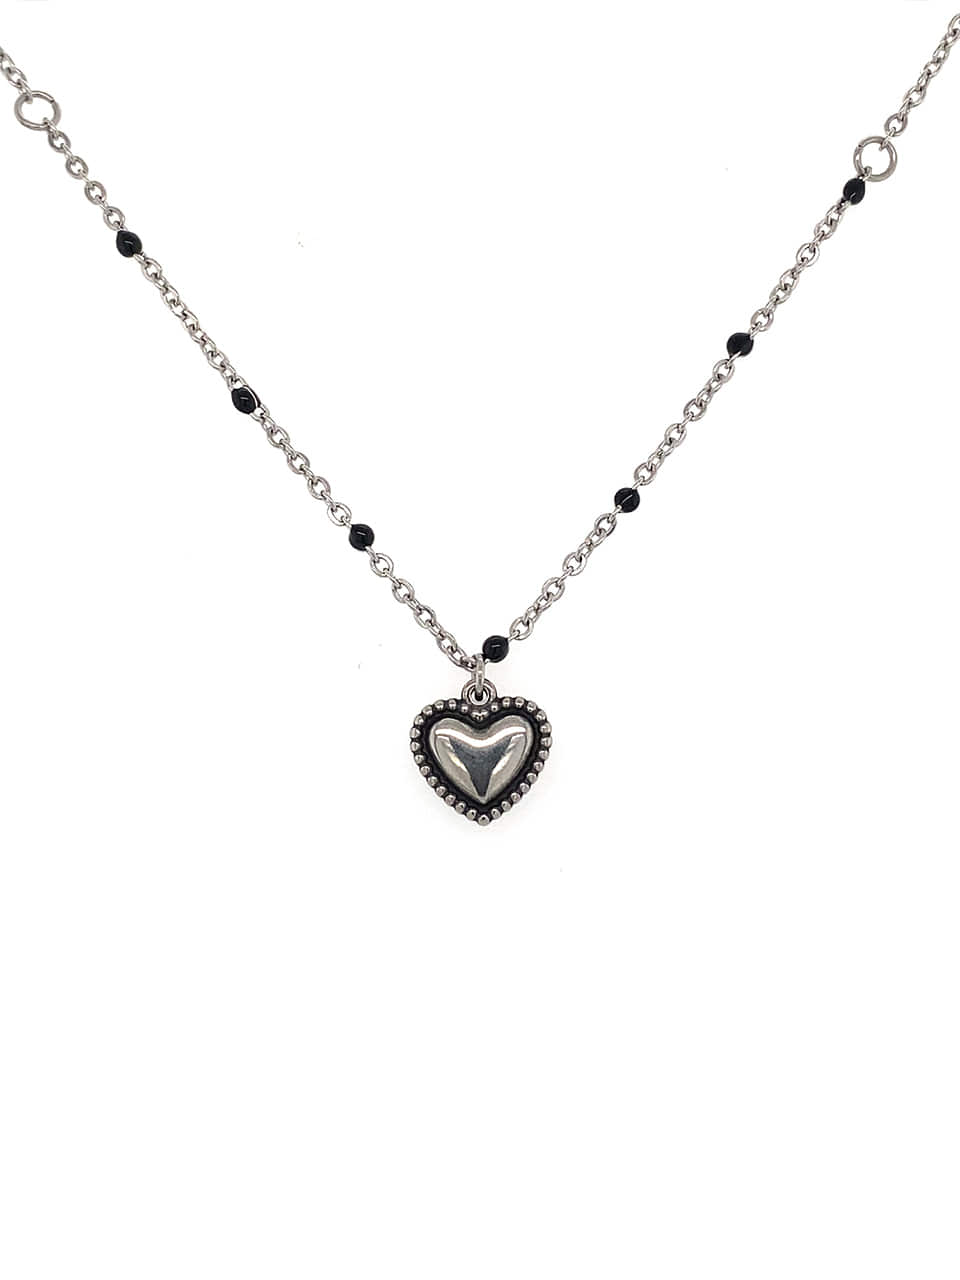 BHS208 Heart Black Beads Chain Necklace